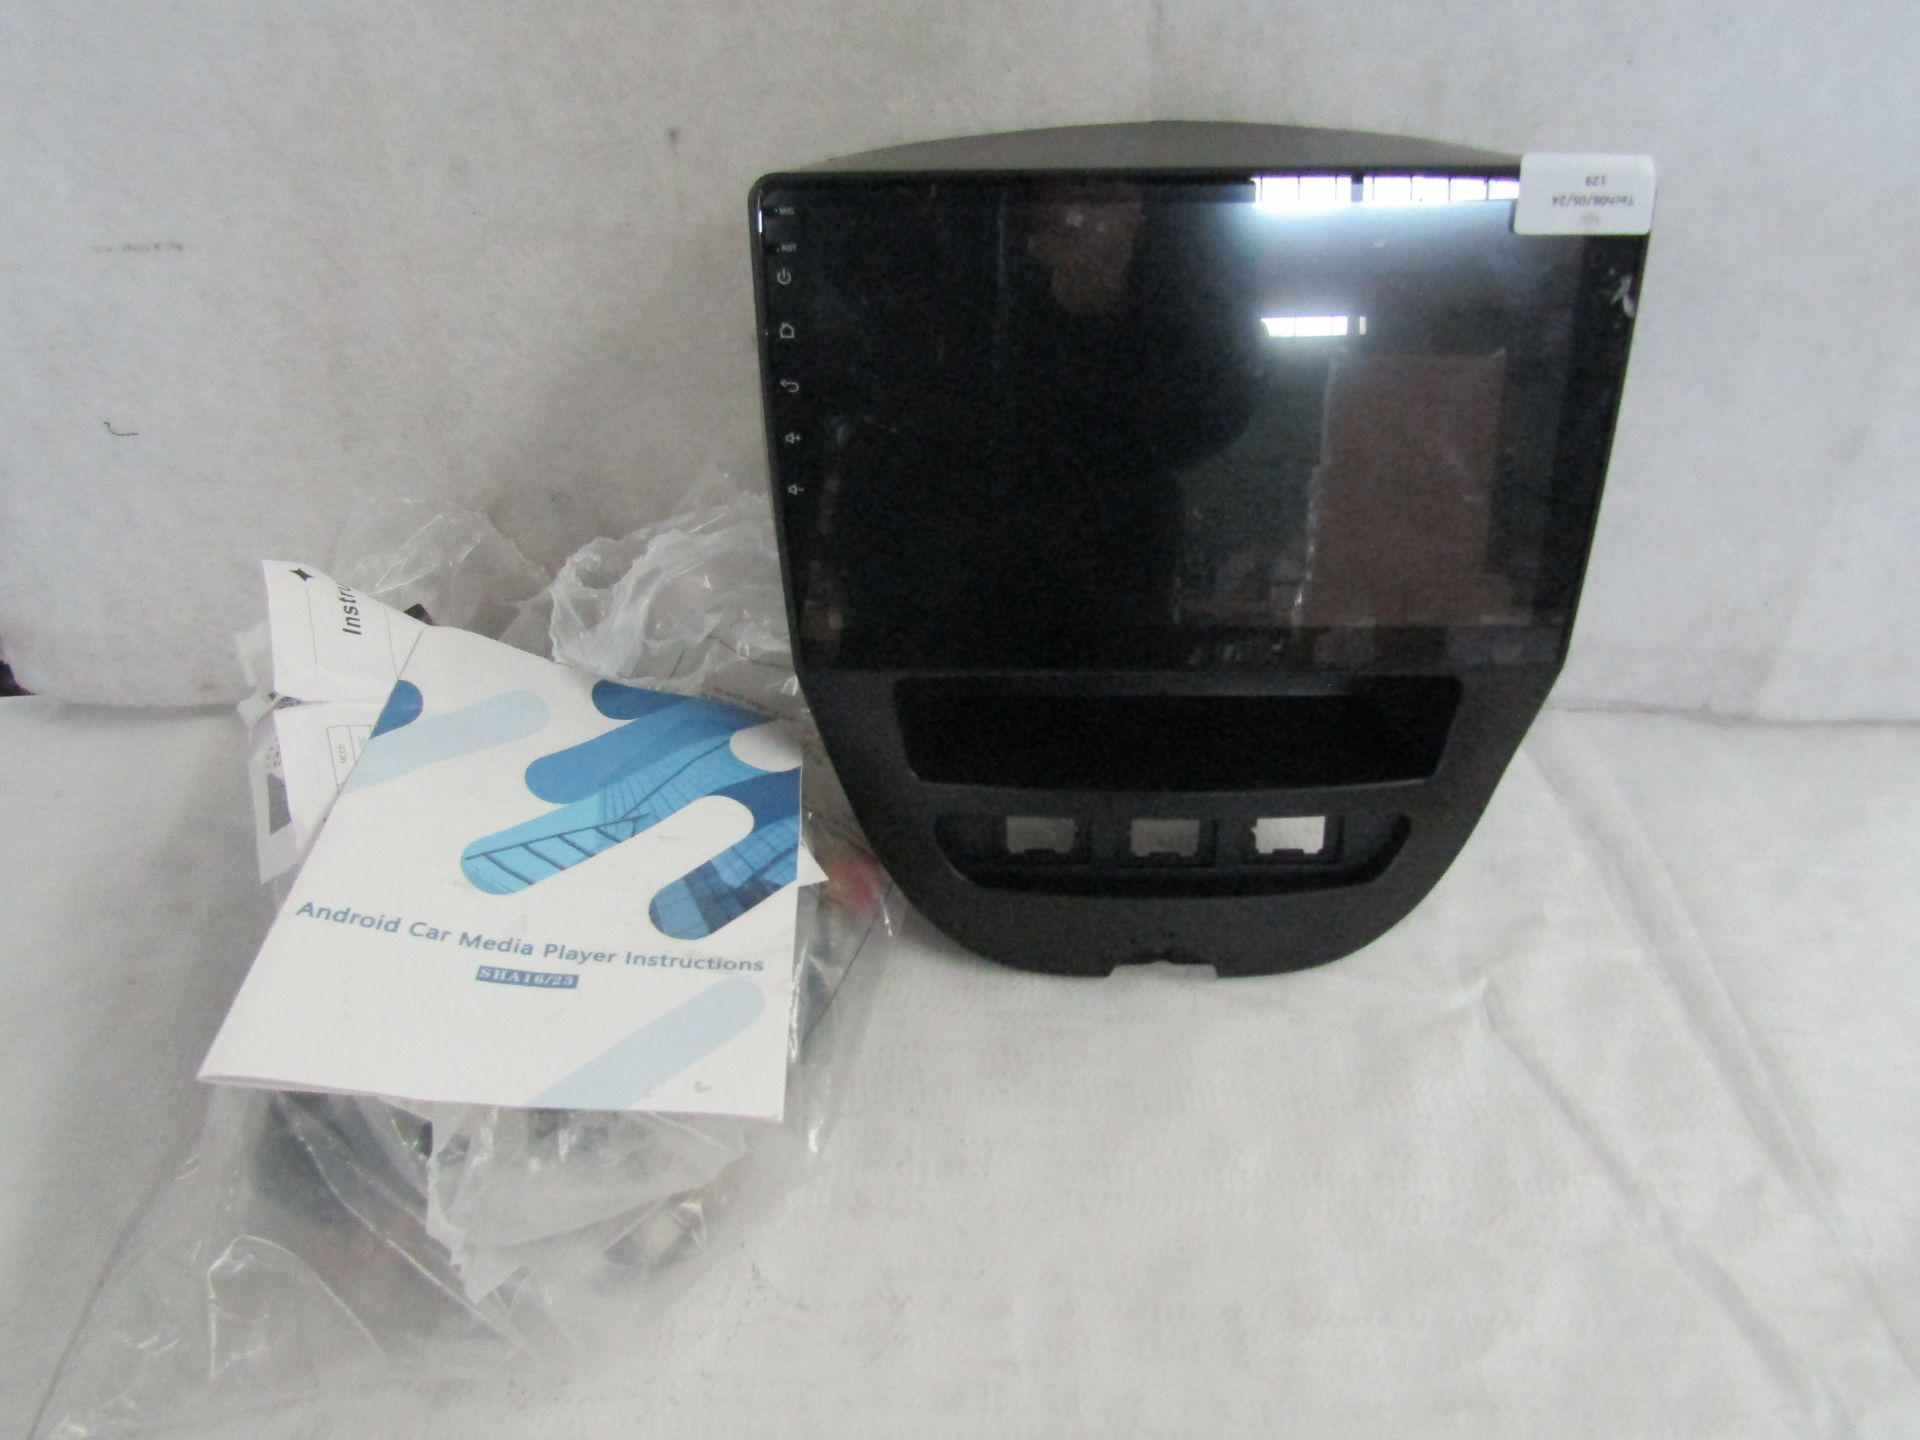 Andriod Car Media Player, SHAI16/23 - Untested & Packaged.